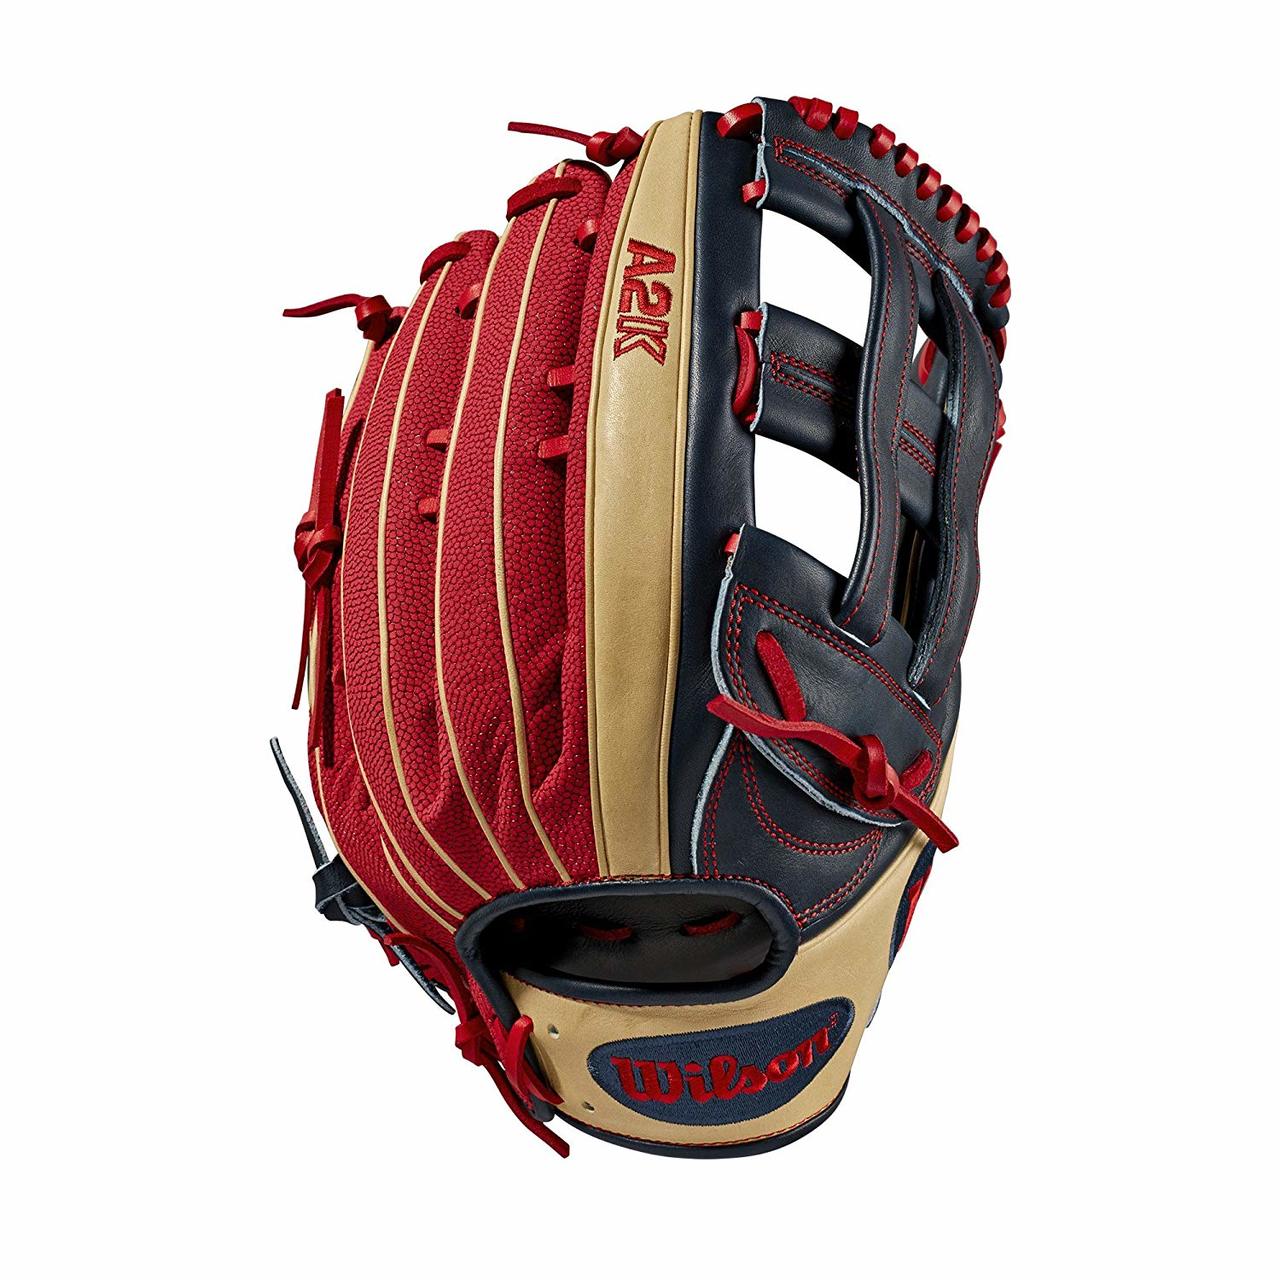 wilson-a2k-mookie-betts-game-model-12-75-baseball-glove-right-hand-throw WTA2KRB19MB50GM-RightHandThrow Wilson 887768732301 Mookie is making a name for himself in Boston so its